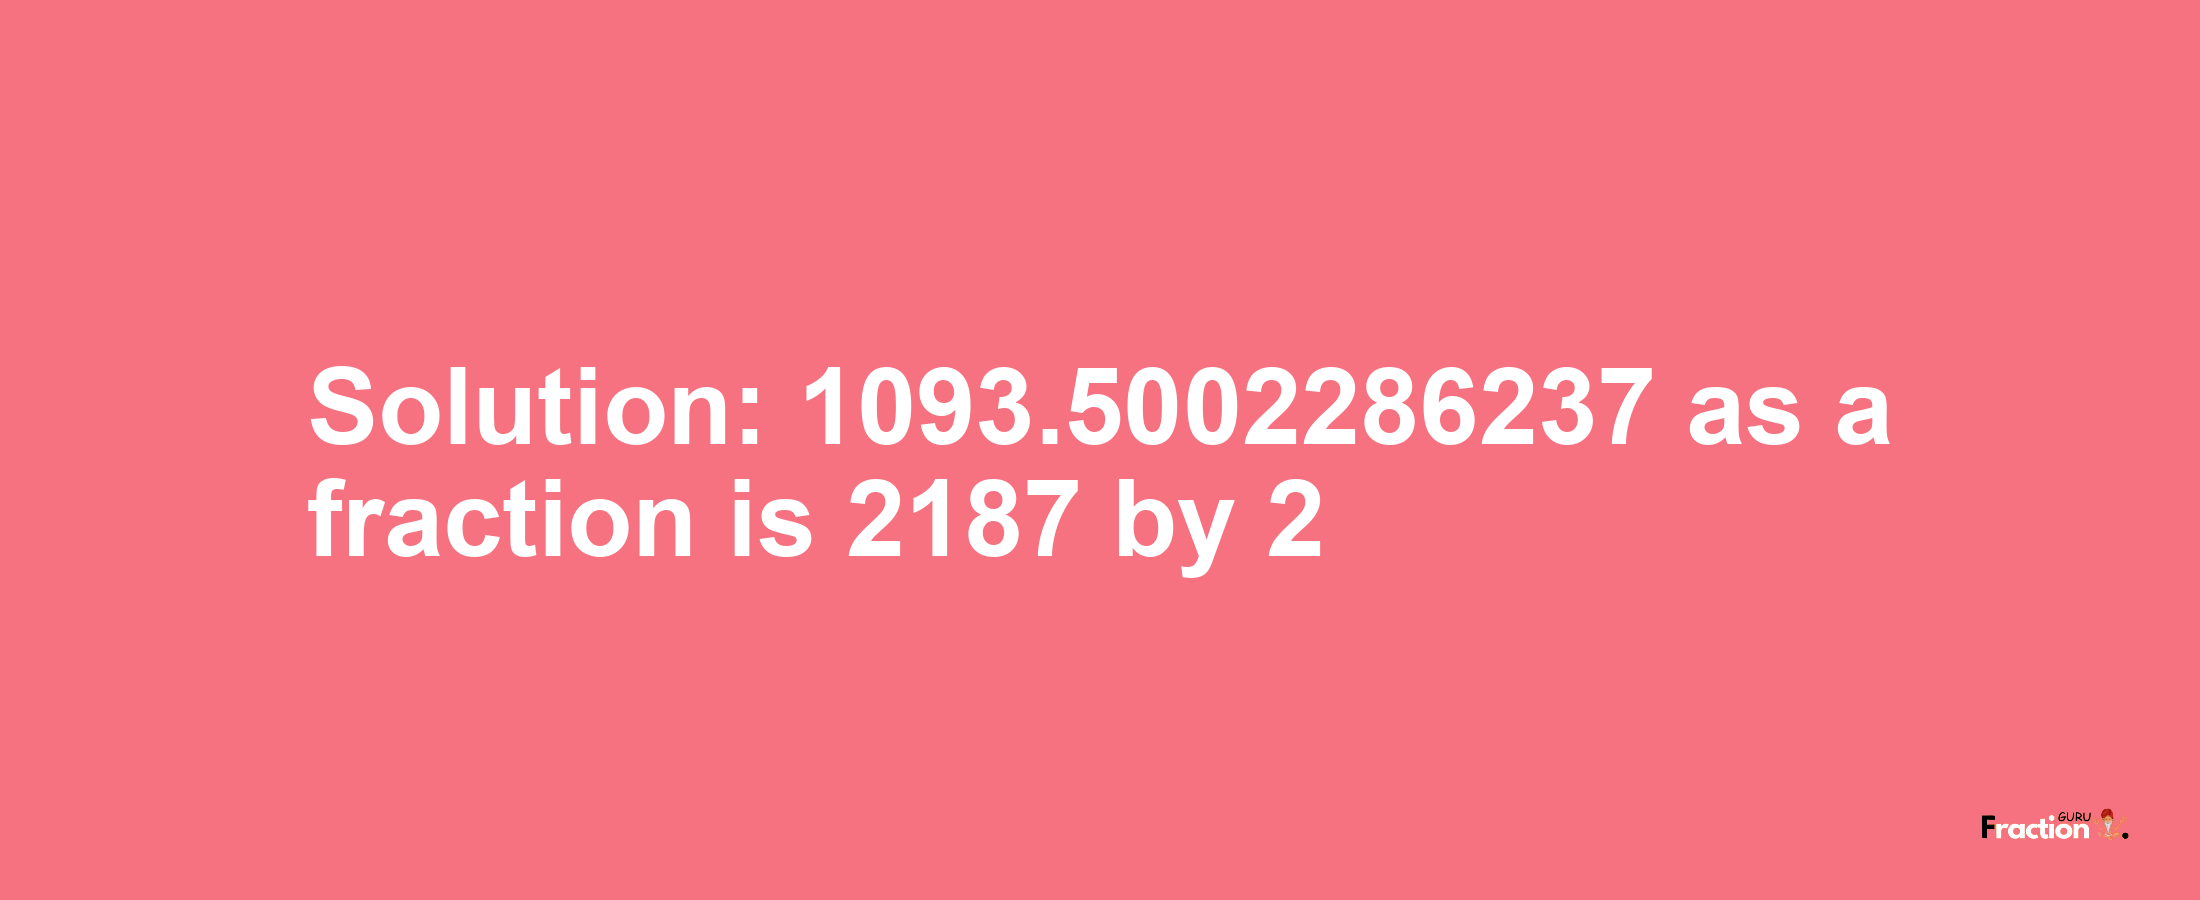 Solution:1093.5002286237 as a fraction is 2187/2